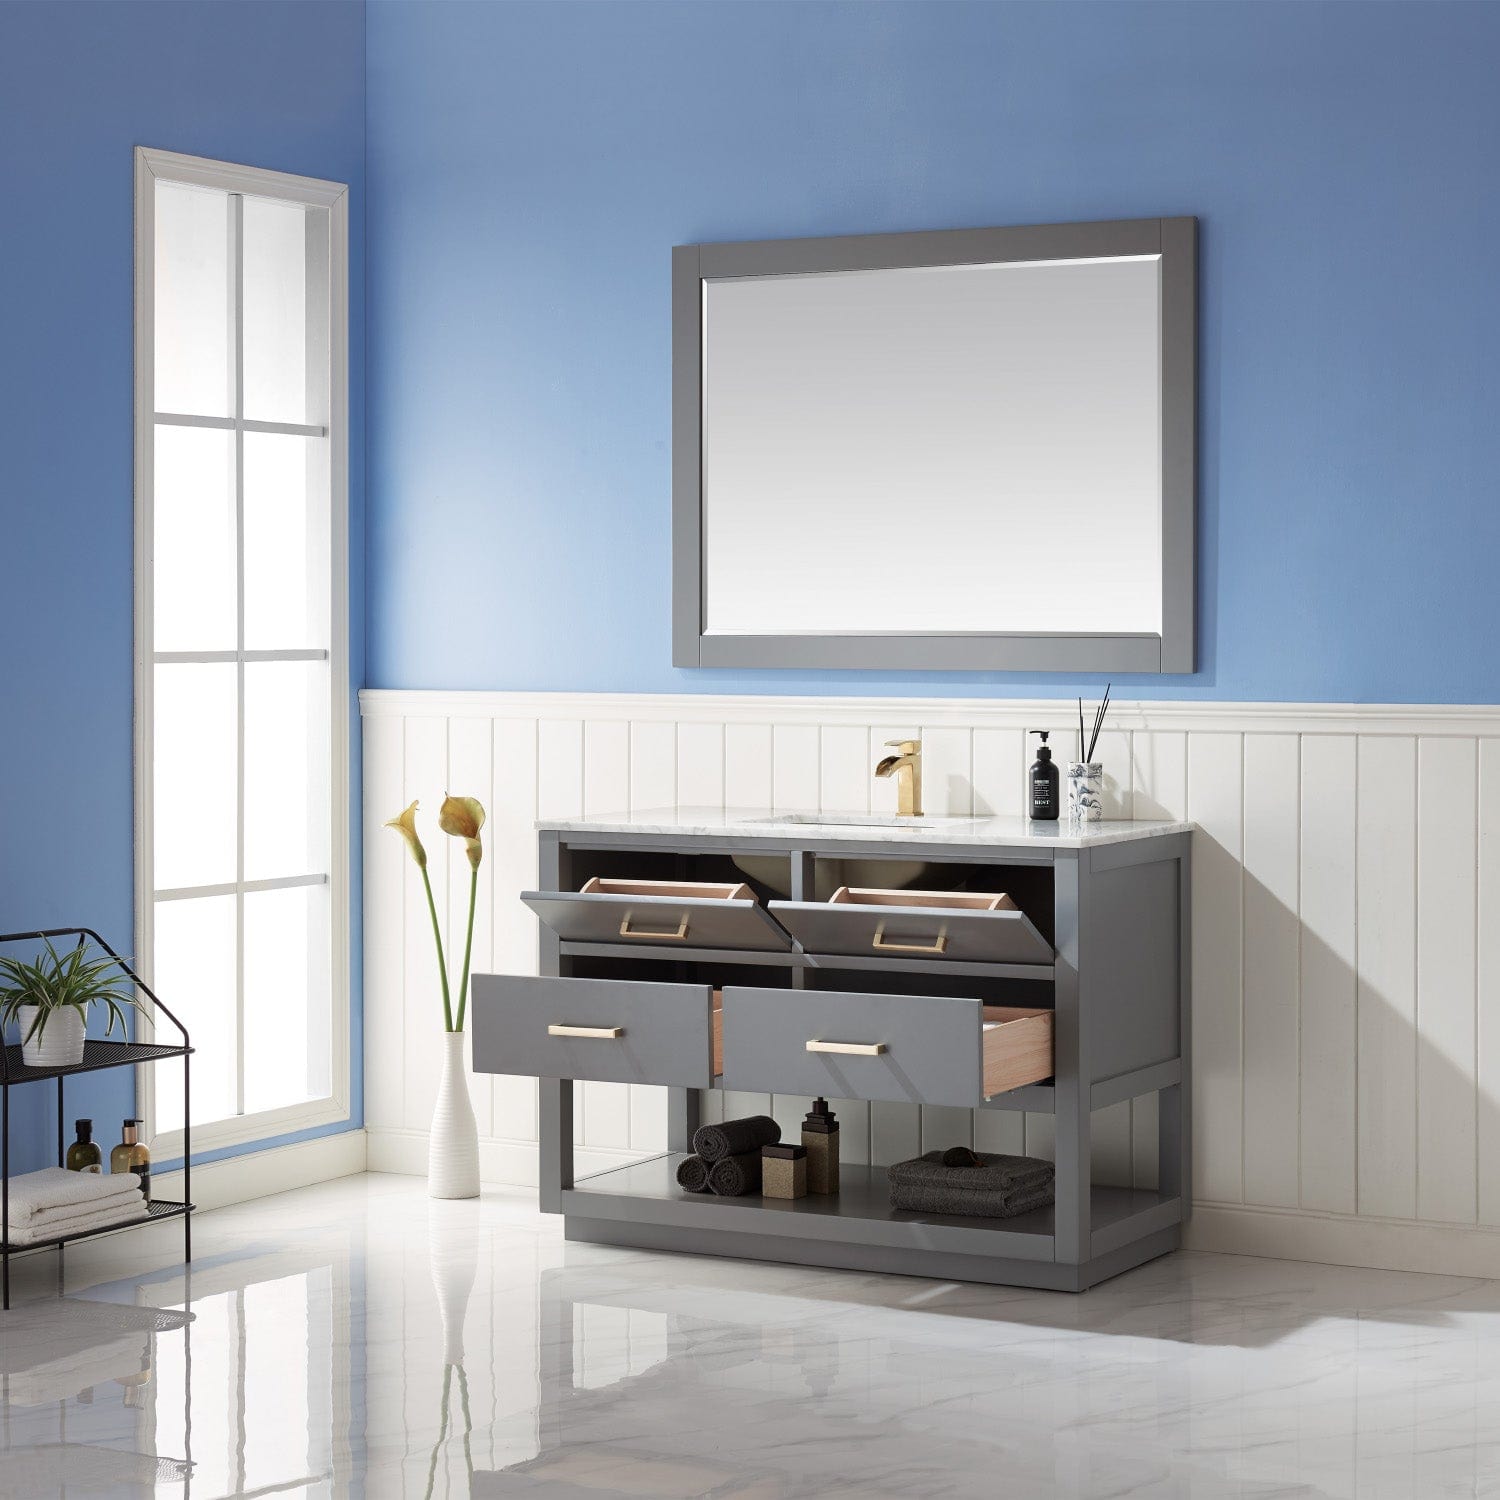 Altair Remi 48" Single Bathroom Vanity Set in Gray and Carrara White Marble Countertop with Mirror 532048-GR-CA - Molaix631112971454Vanity532048-GR-CA